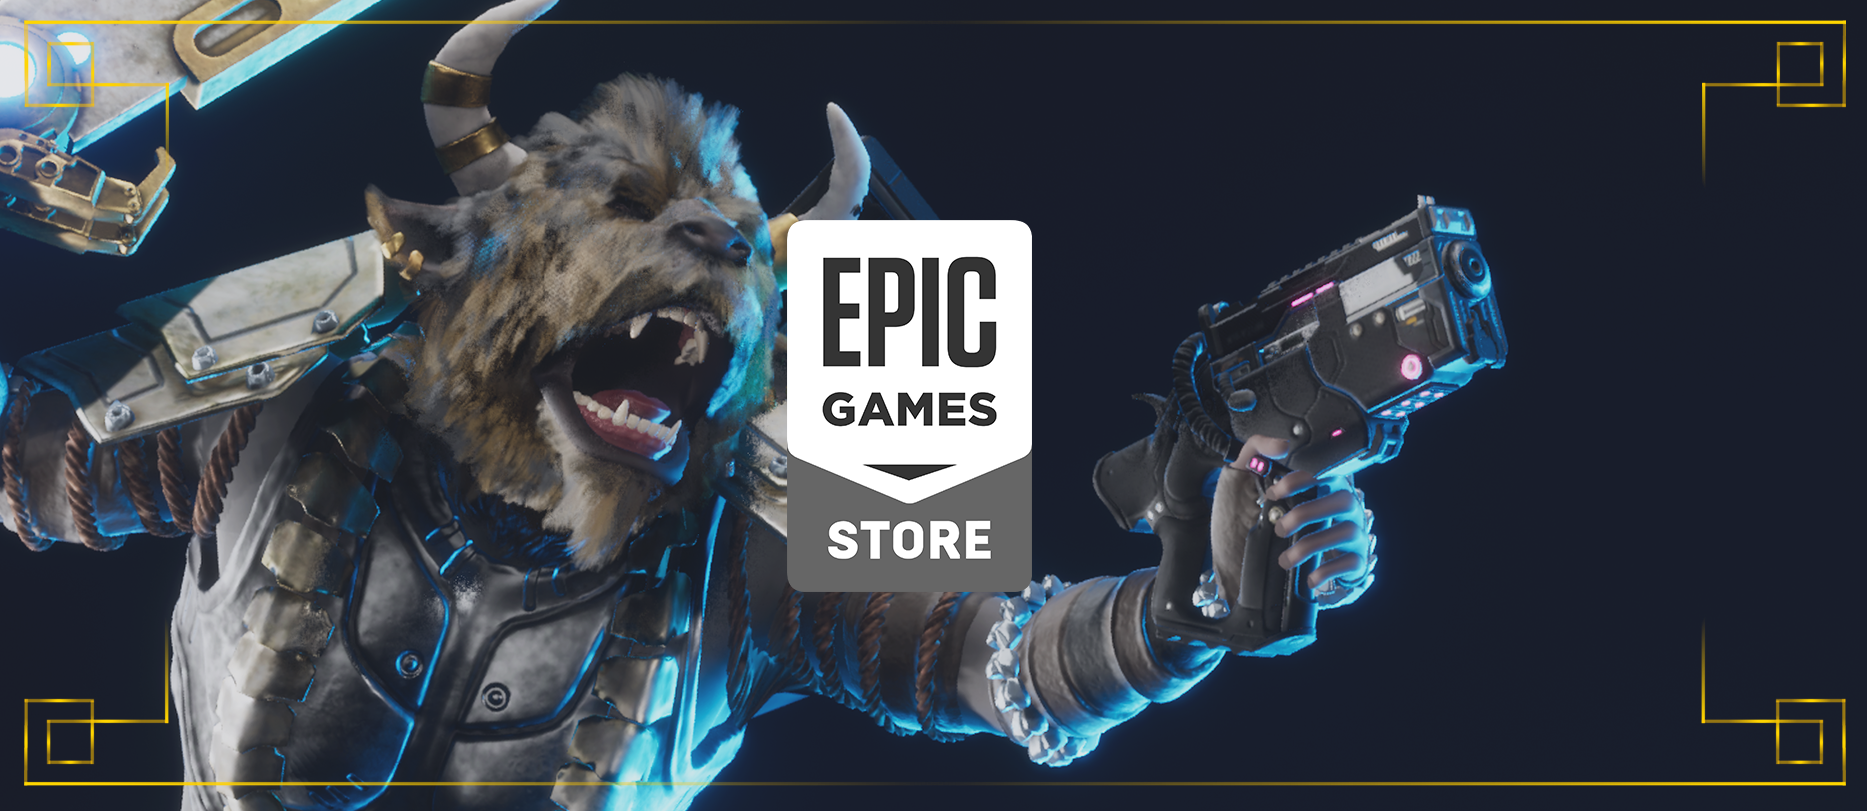 Our Game is Available for Wishlist on Epic Games Store, Powered by Unreal Engine 5!